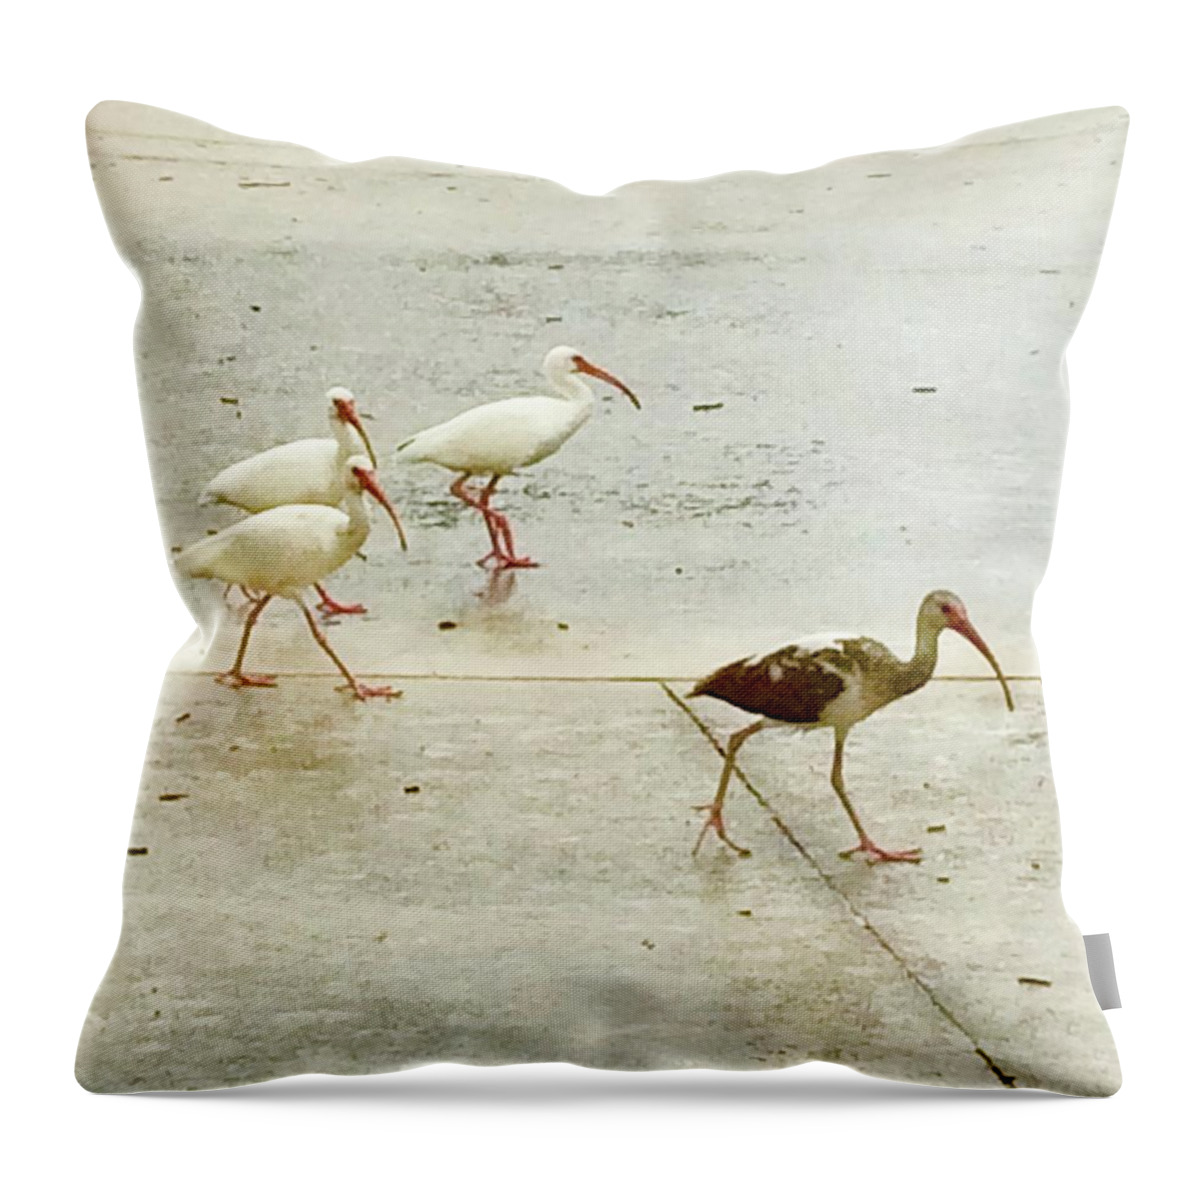 Egrets Throw Pillow featuring the photograph A Step Ahead by Suzanne Udell Levinger